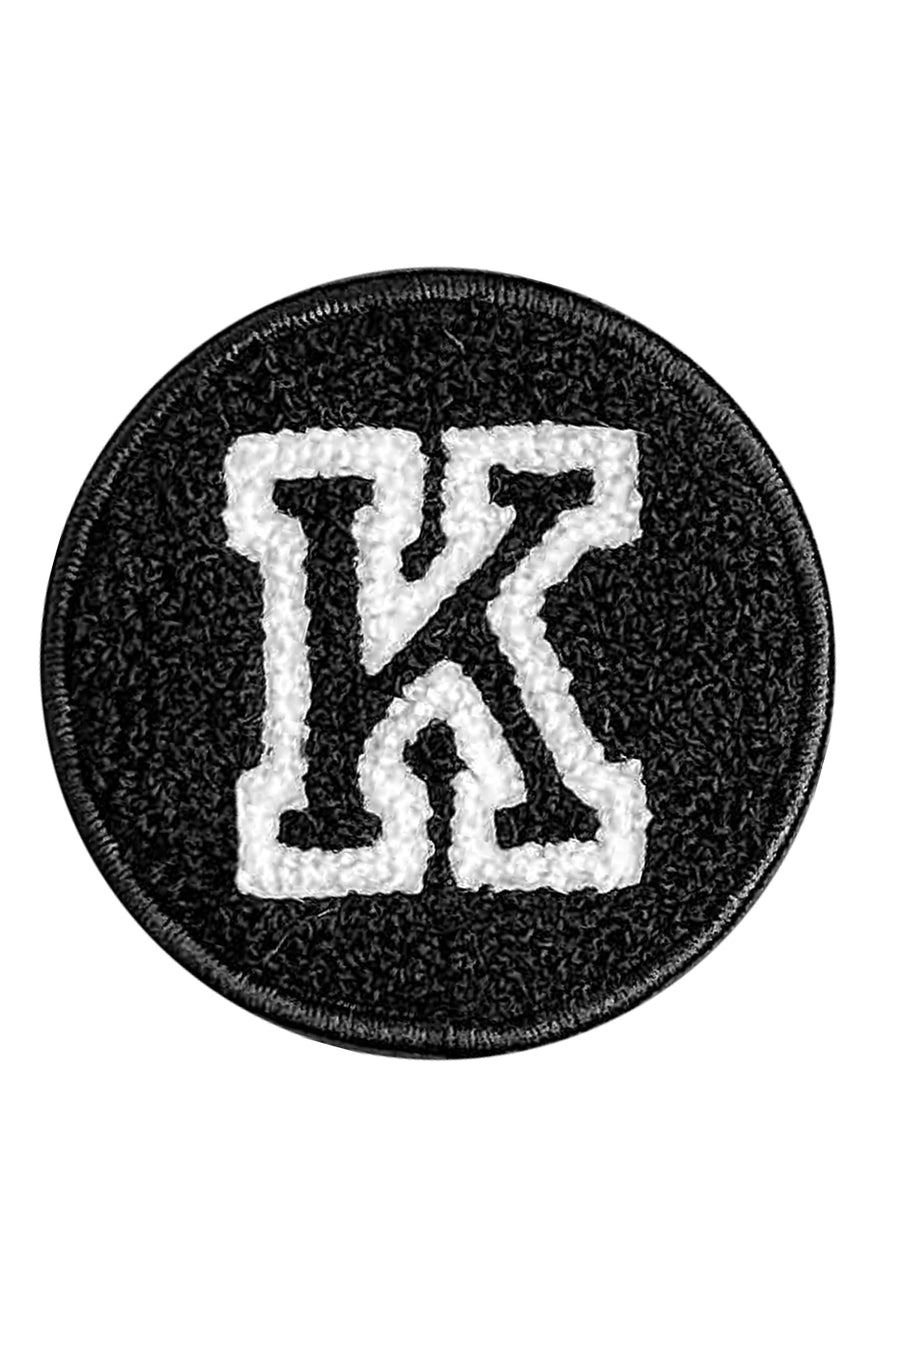 Velcro Initial Letter K Patch